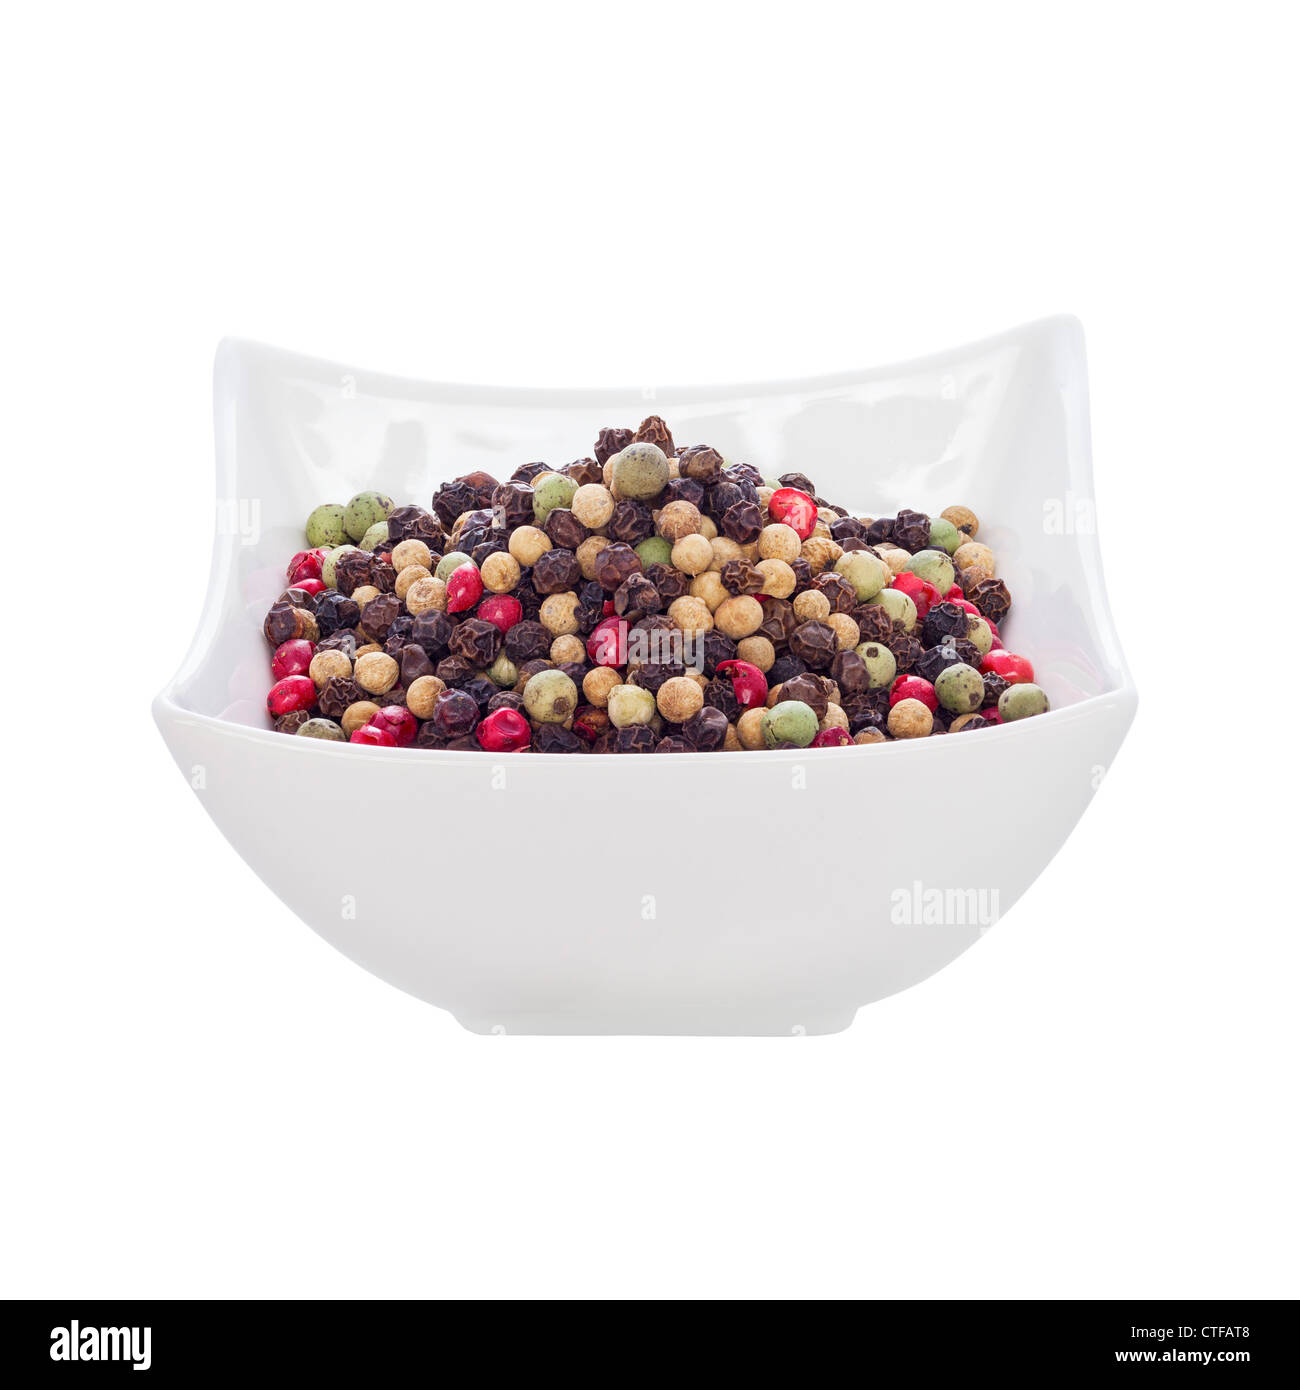 A small pot of gourmet mixed peppercorns. Fully in focus, front to back. Stock Photo